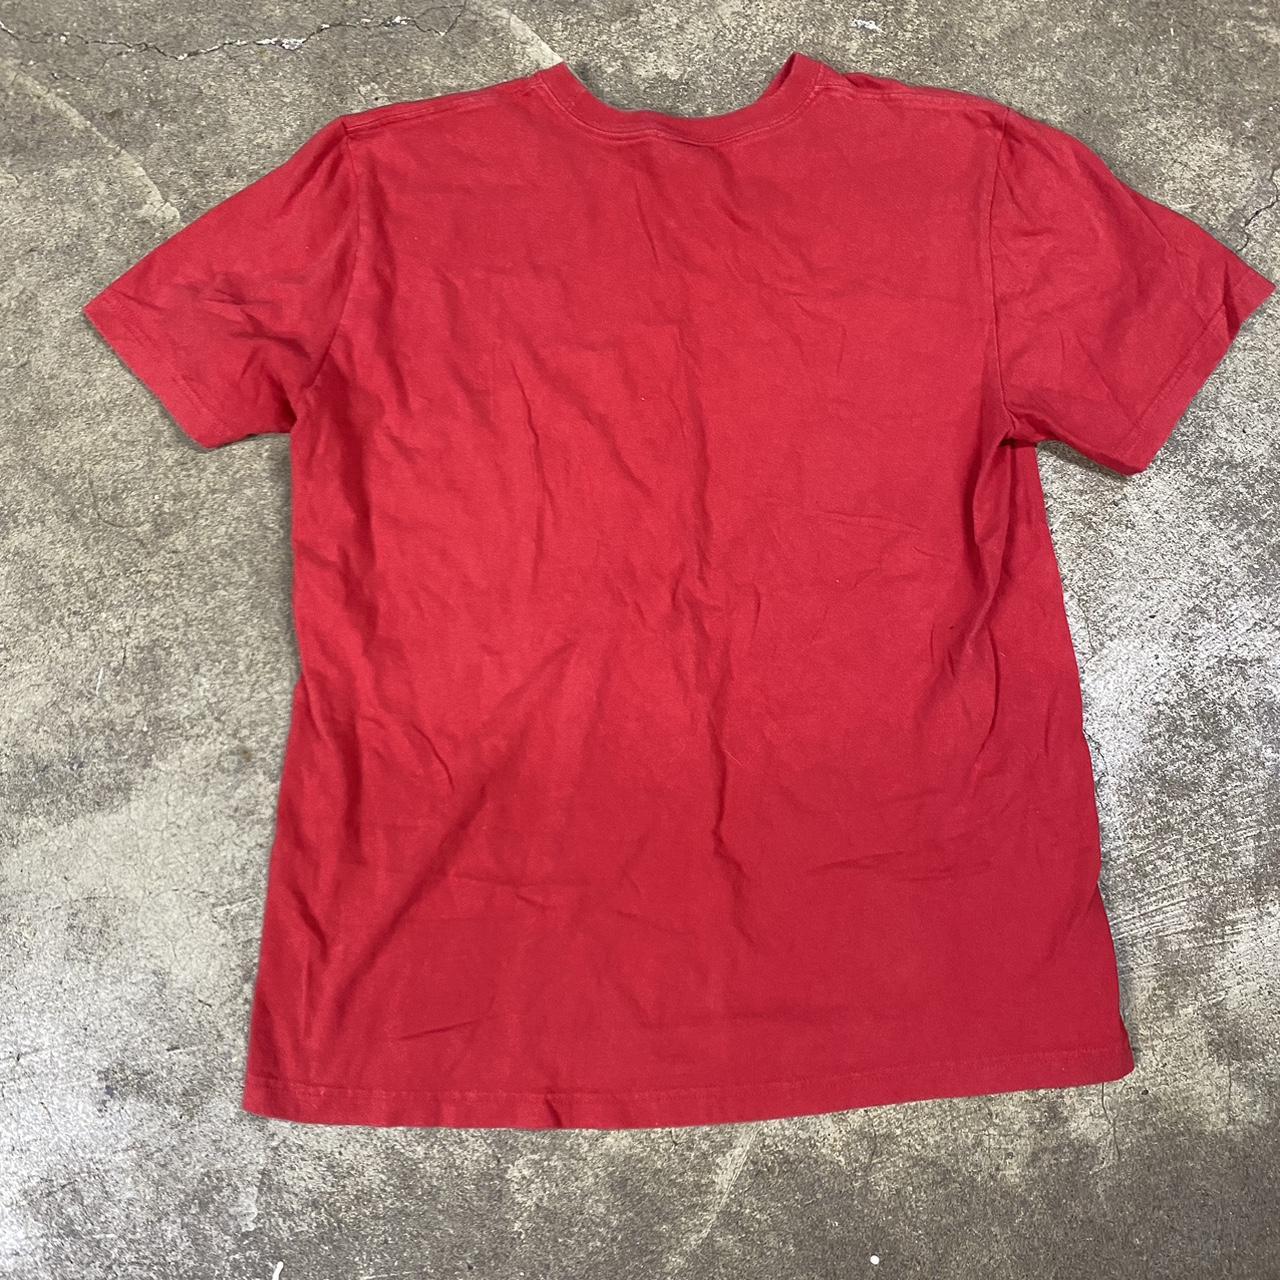 Nike Men's Red and Blue T-shirt (3)